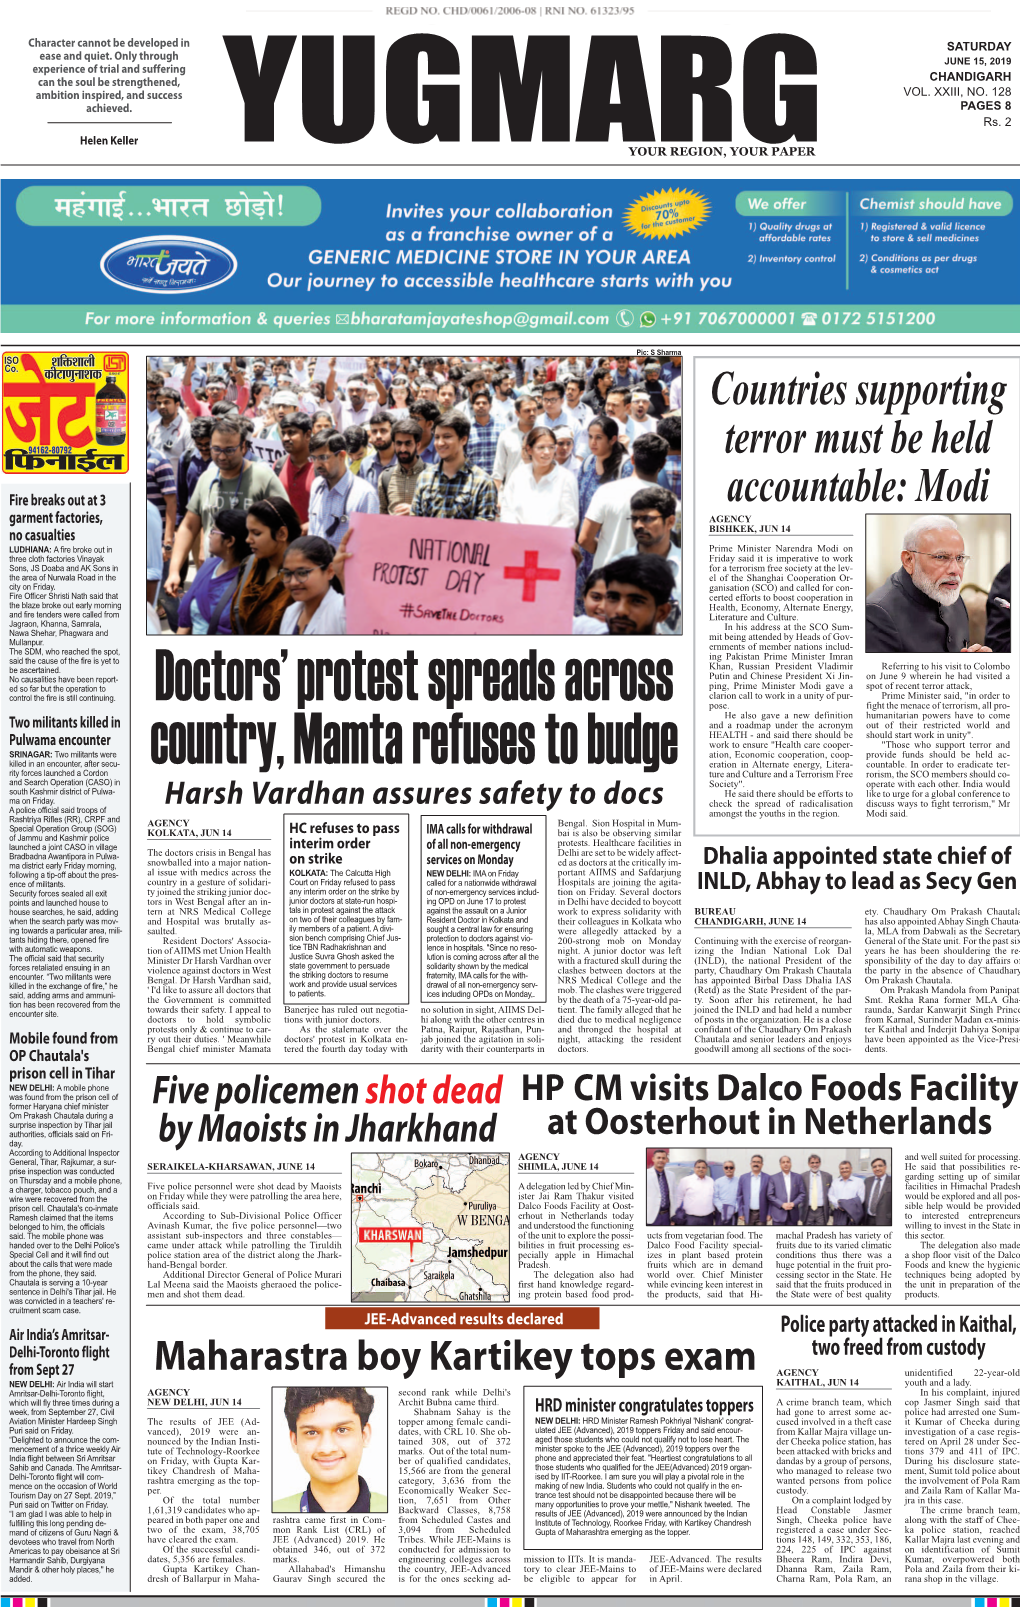 Doctors' Protest Spreads Across Country, Mamta Refuses to Budge